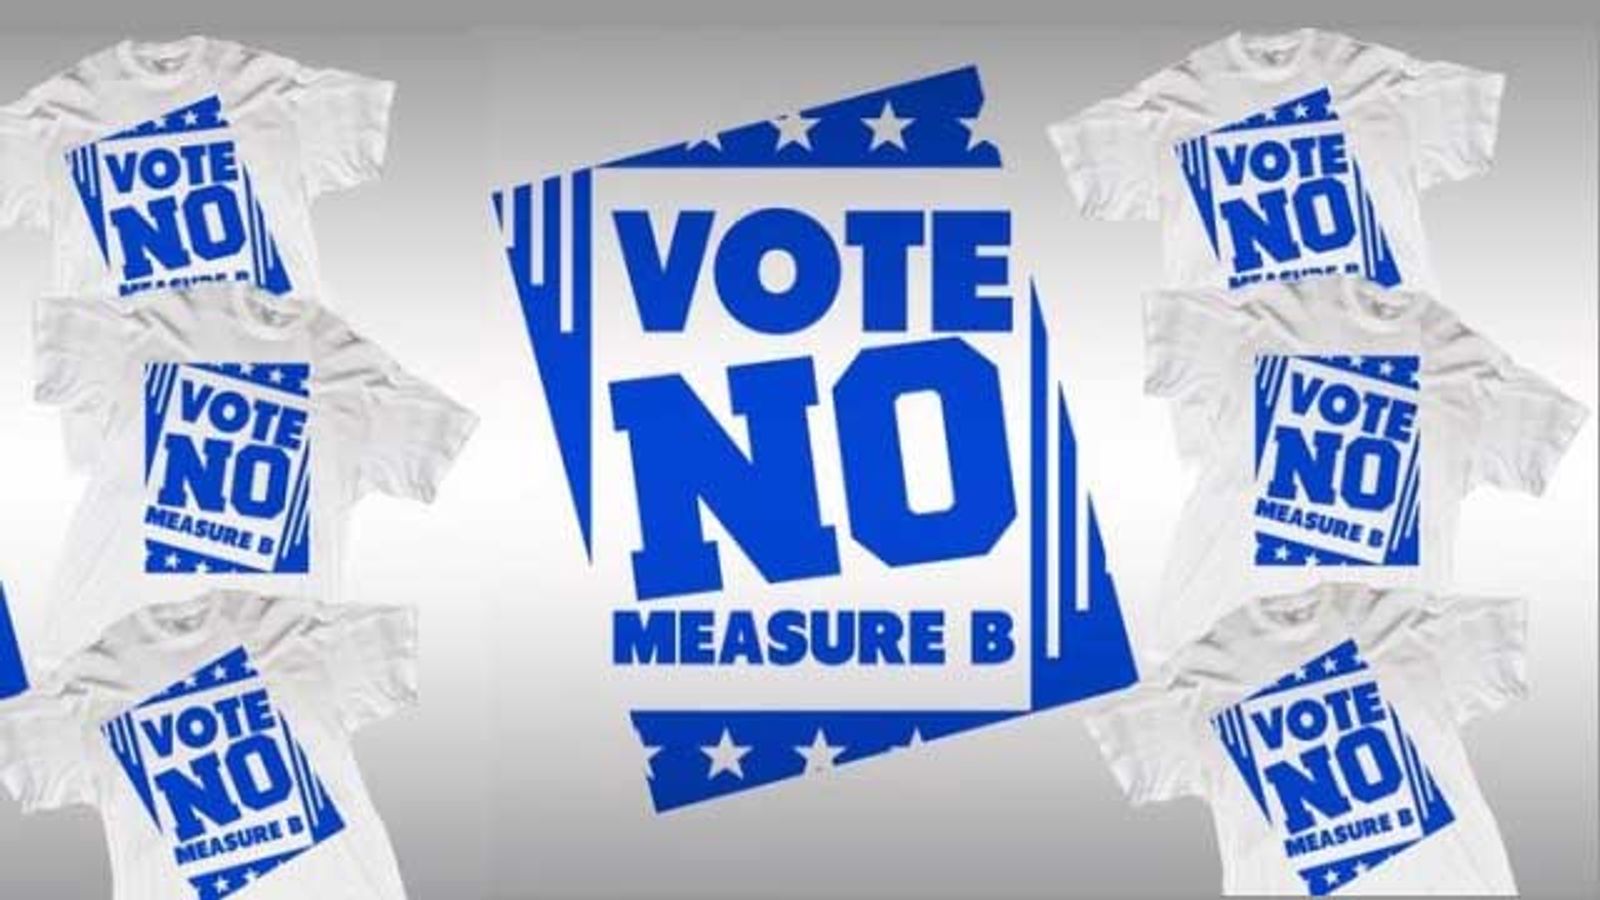 'No on Measure B' Sees First Grassroots Support Movements